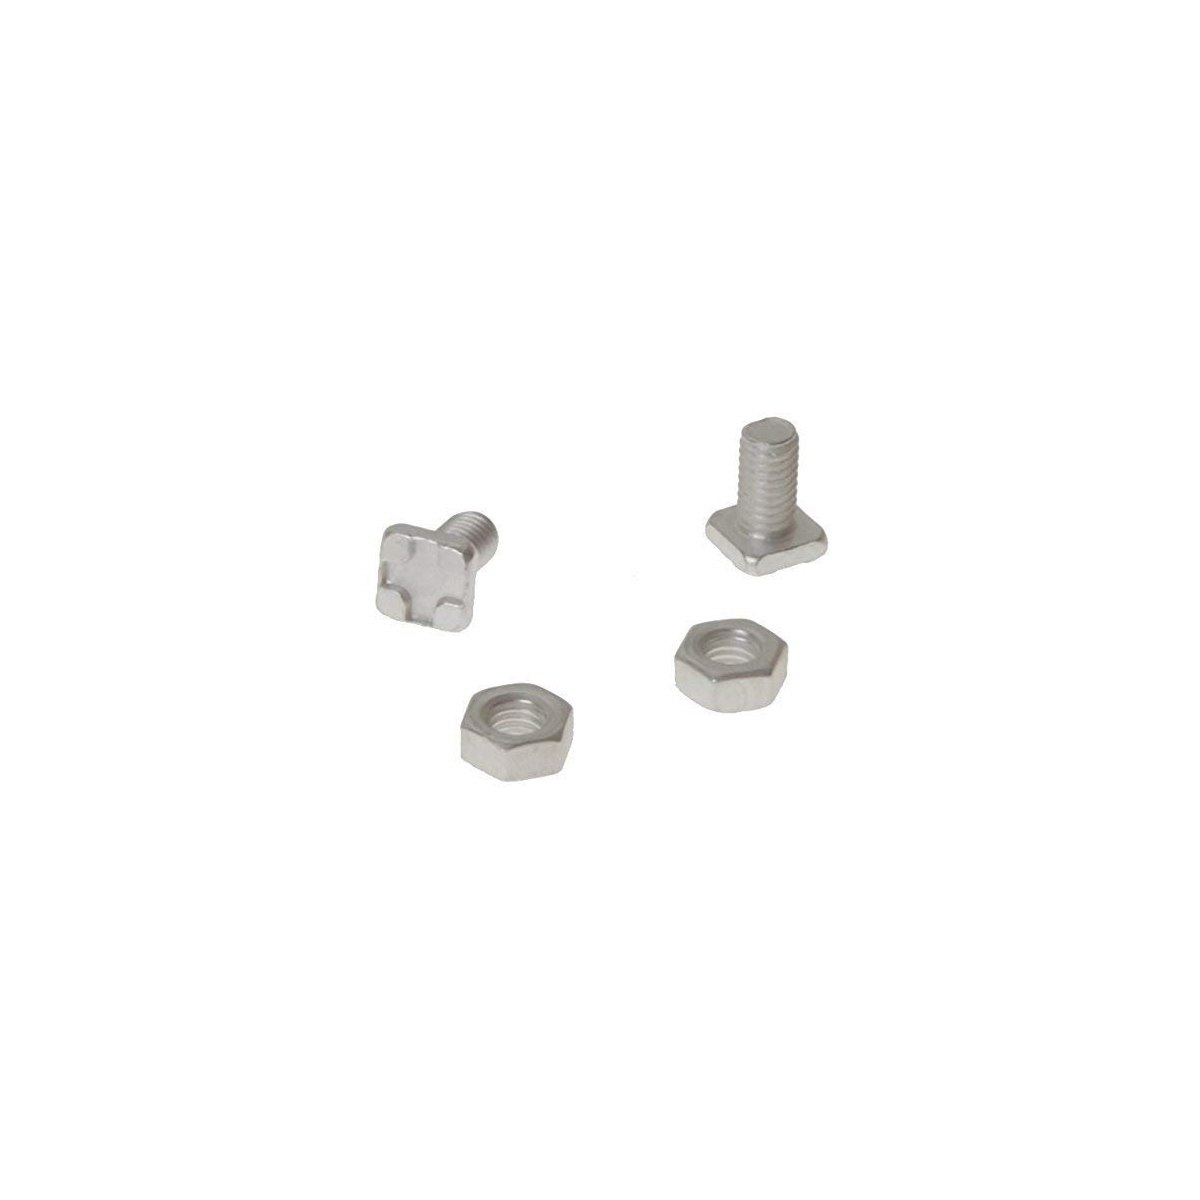 Square Head Nuts and Bolts for Greenhouses